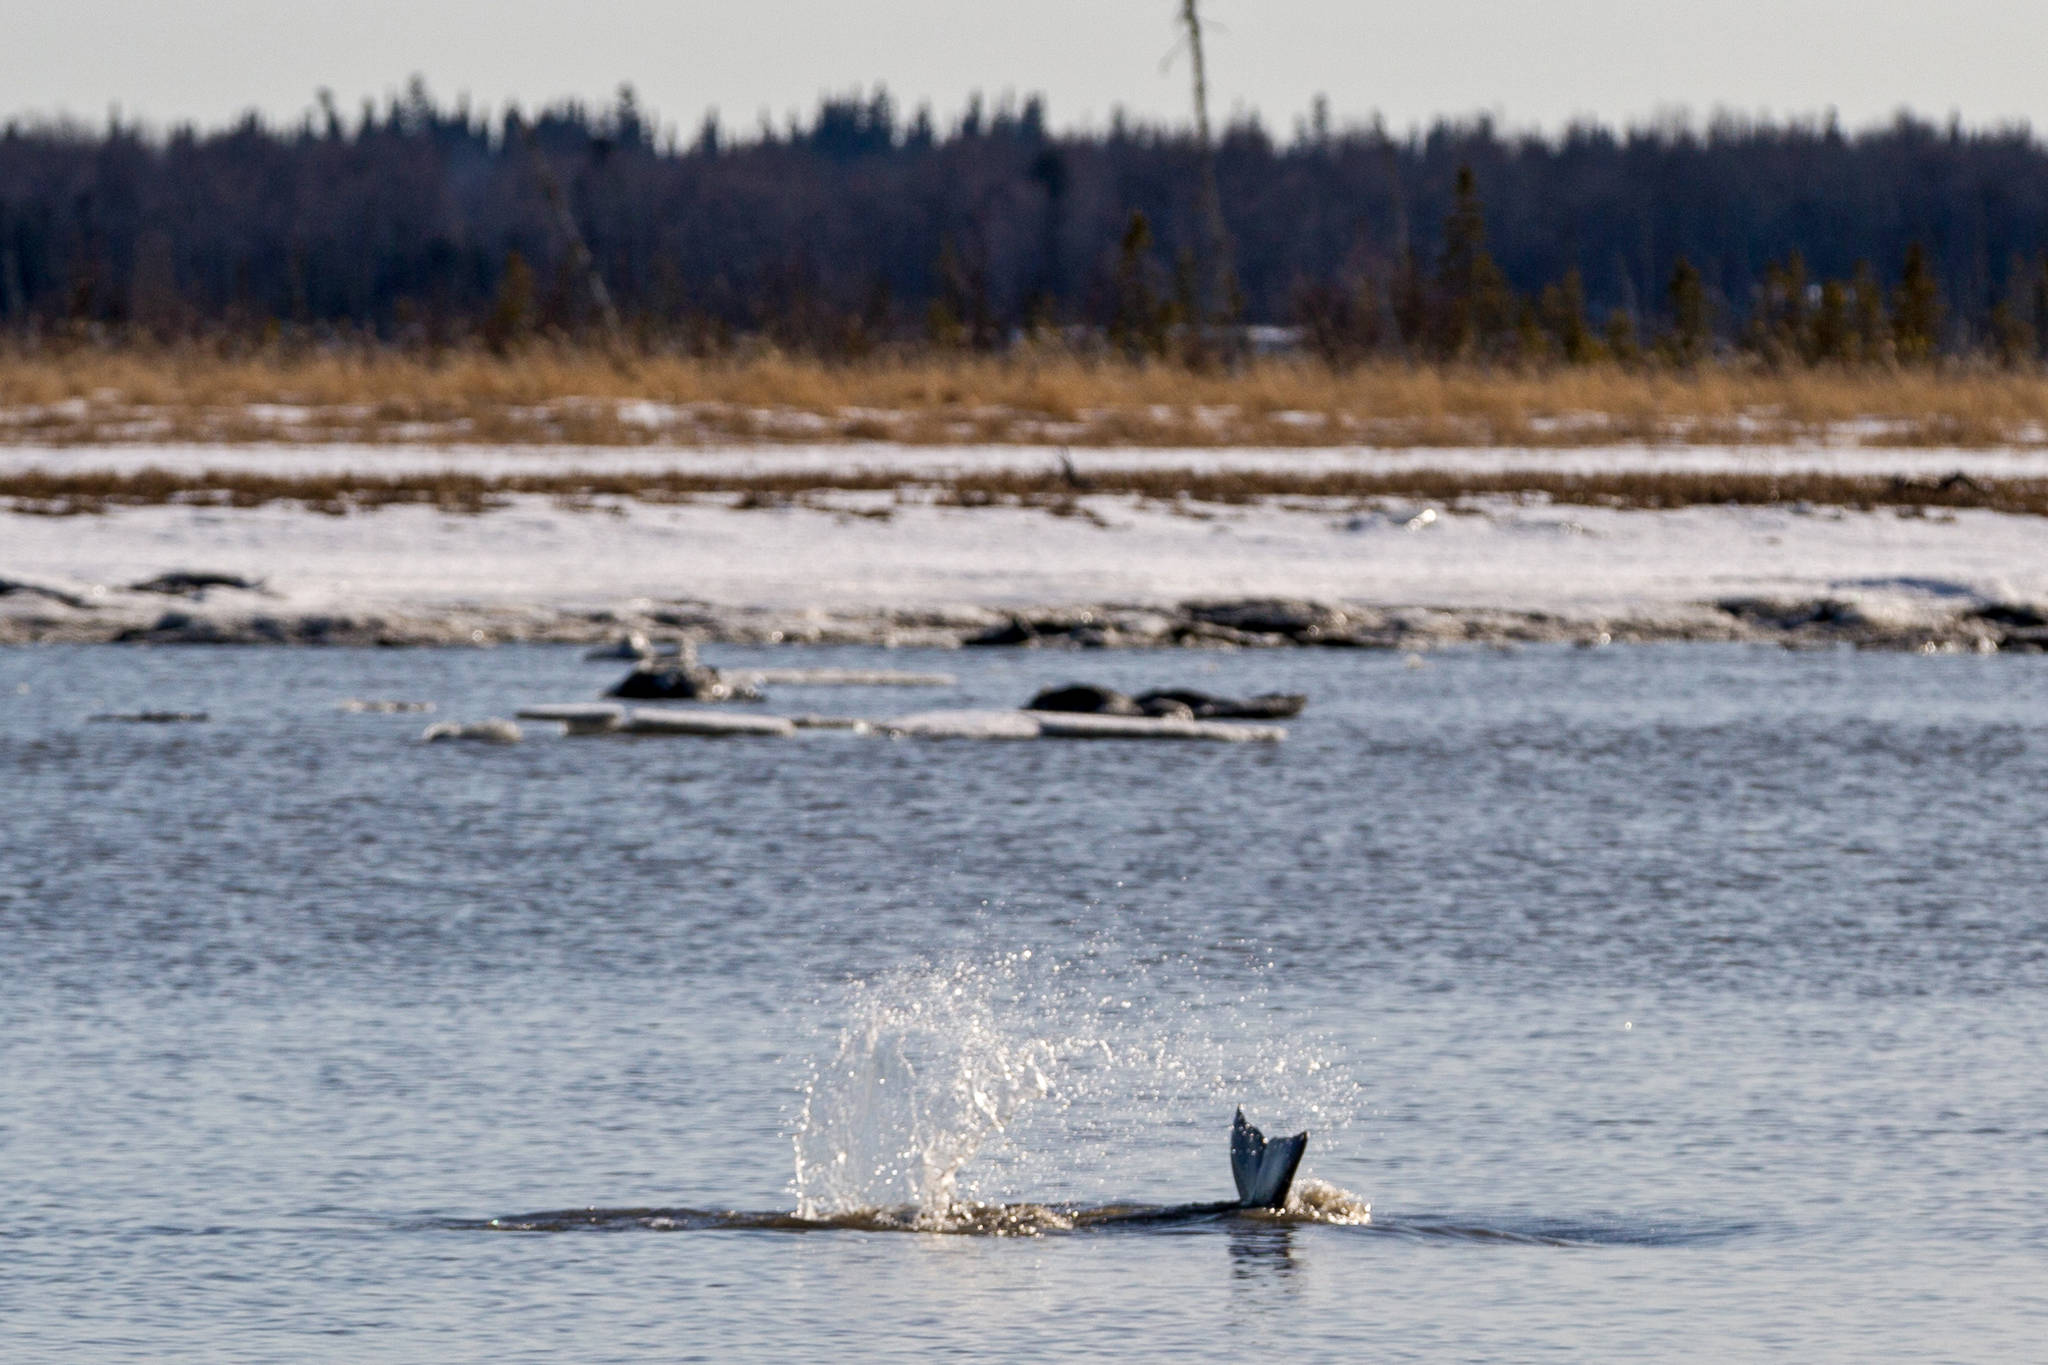 A beluga splashes its tail in the Kenai River on April 2, 2018 in Kenai, Alaska. Between mid-March and April, beluga researcher Kimberly Ovitz observed 42 groups of up to 27 belugas traveling up and down the Kenai River, a habitat Ovitz said “has sort of been forgotten in the world of beluga research.” (Photo courtesy of Rickard Sjoeberg)